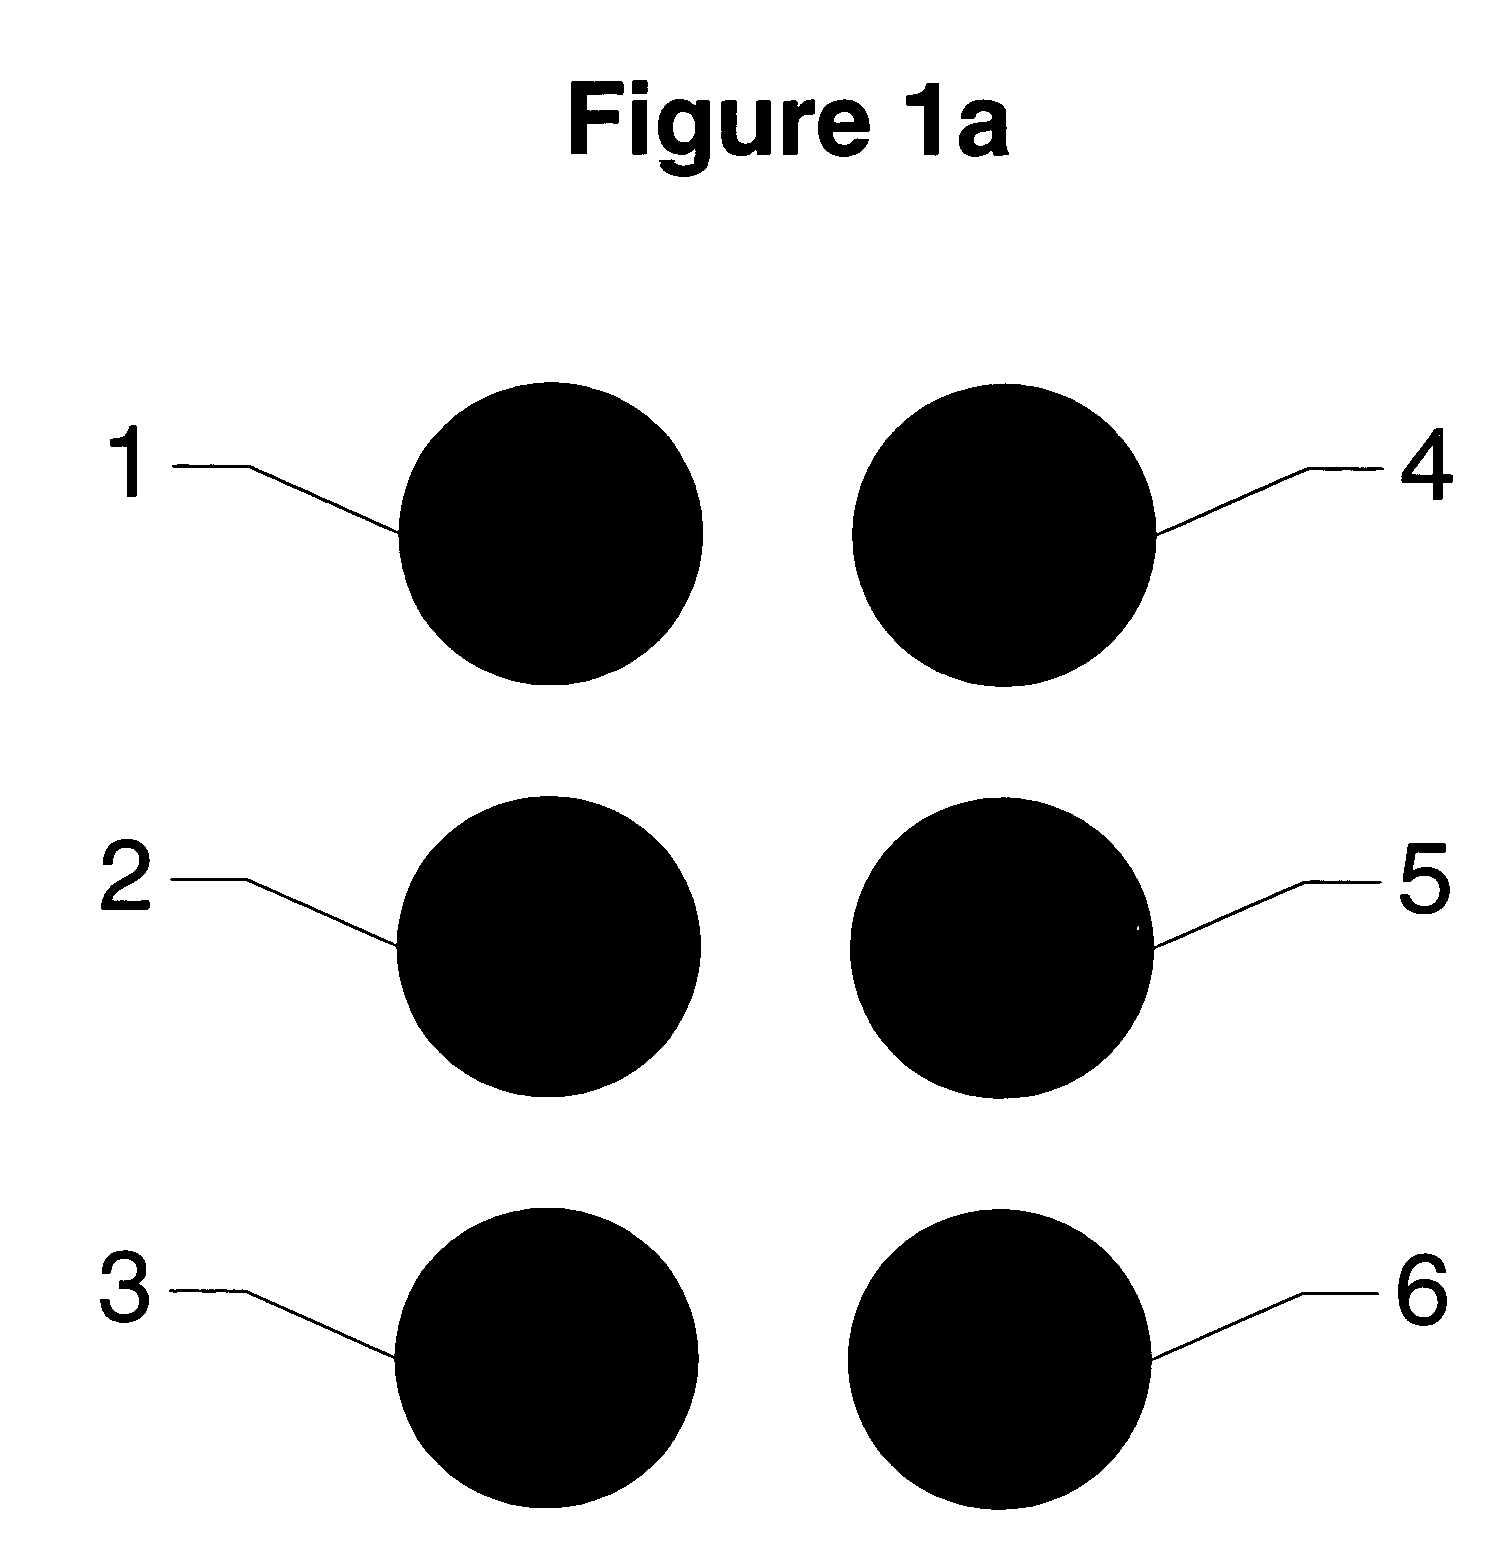 System and method for integrating tactile language with the visual alphanumeric characters